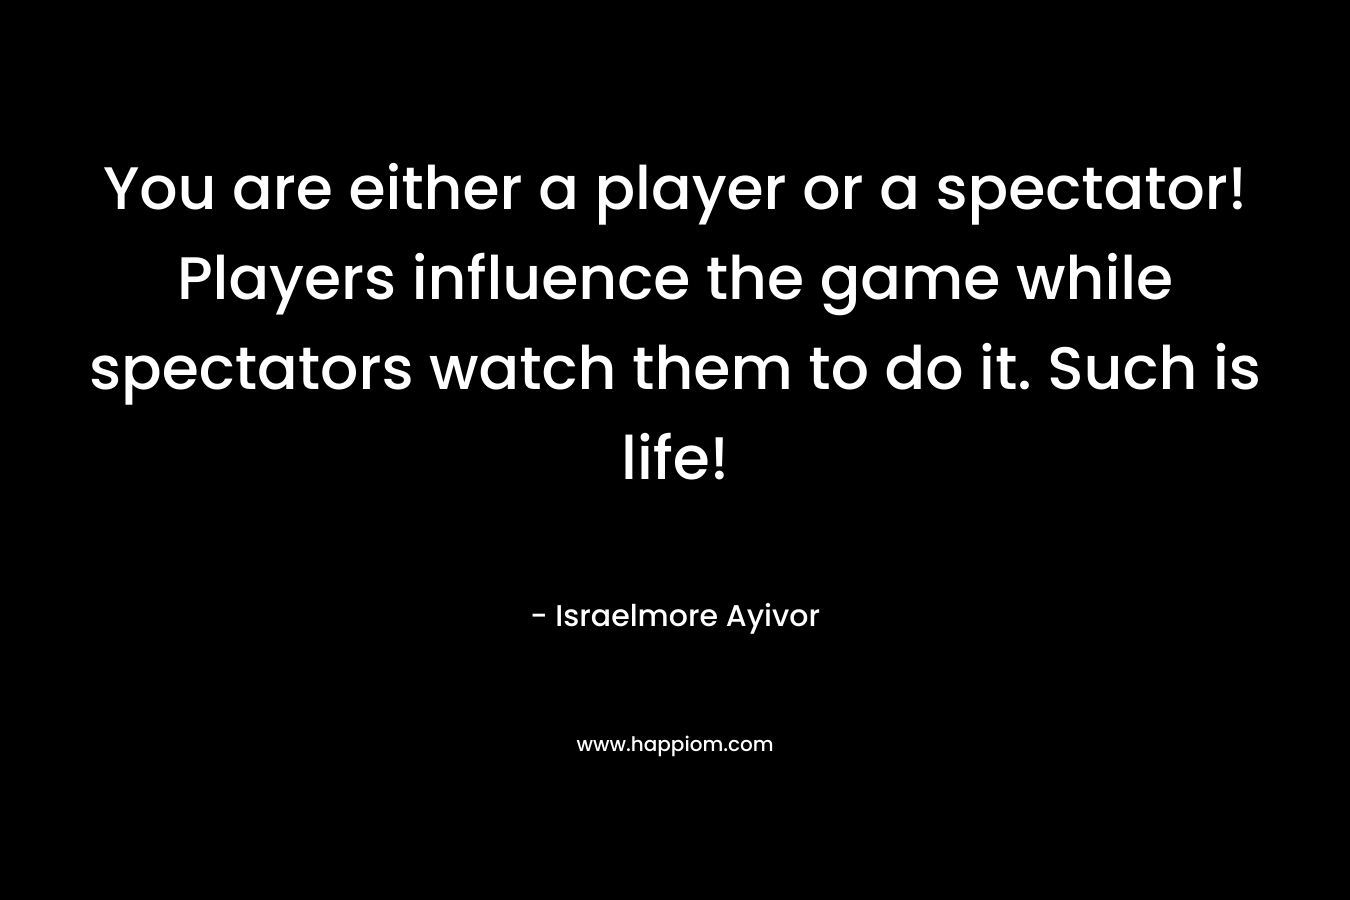 You are either a player or a spectator! Players influence the game while spectators watch them to do it. Such is life! – Israelmore Ayivor